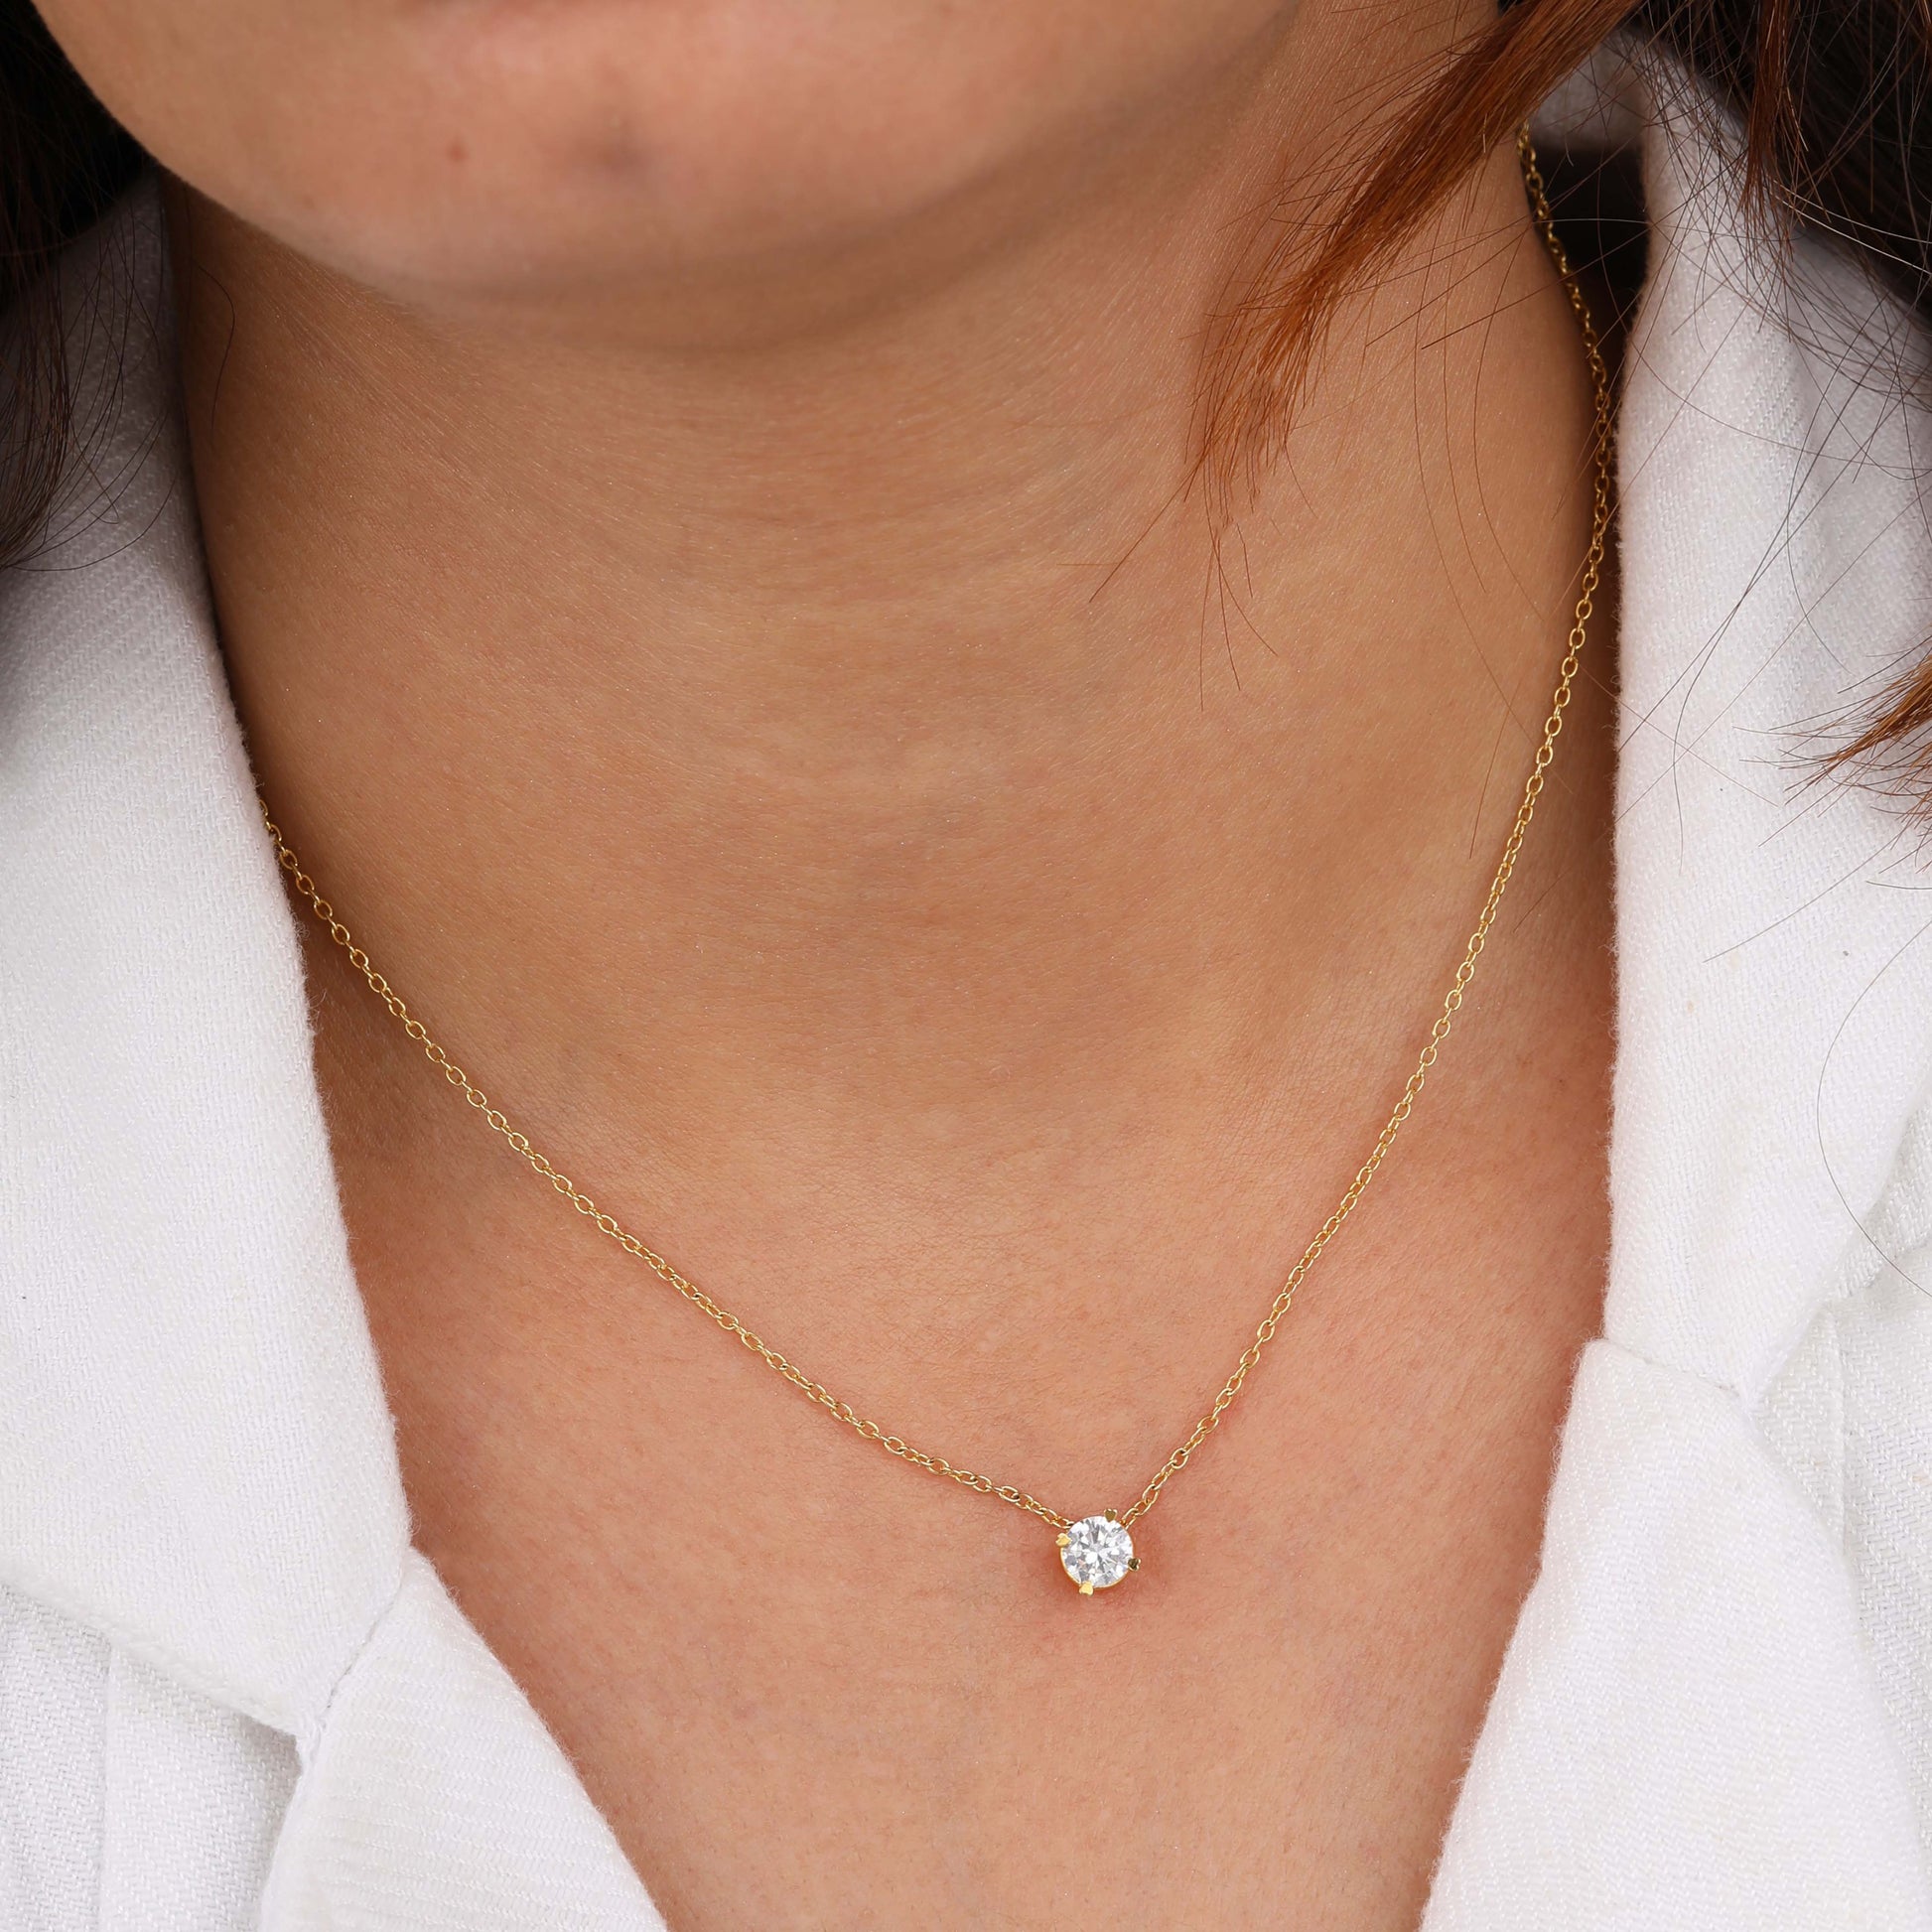 a person has wearing solitaire necklace